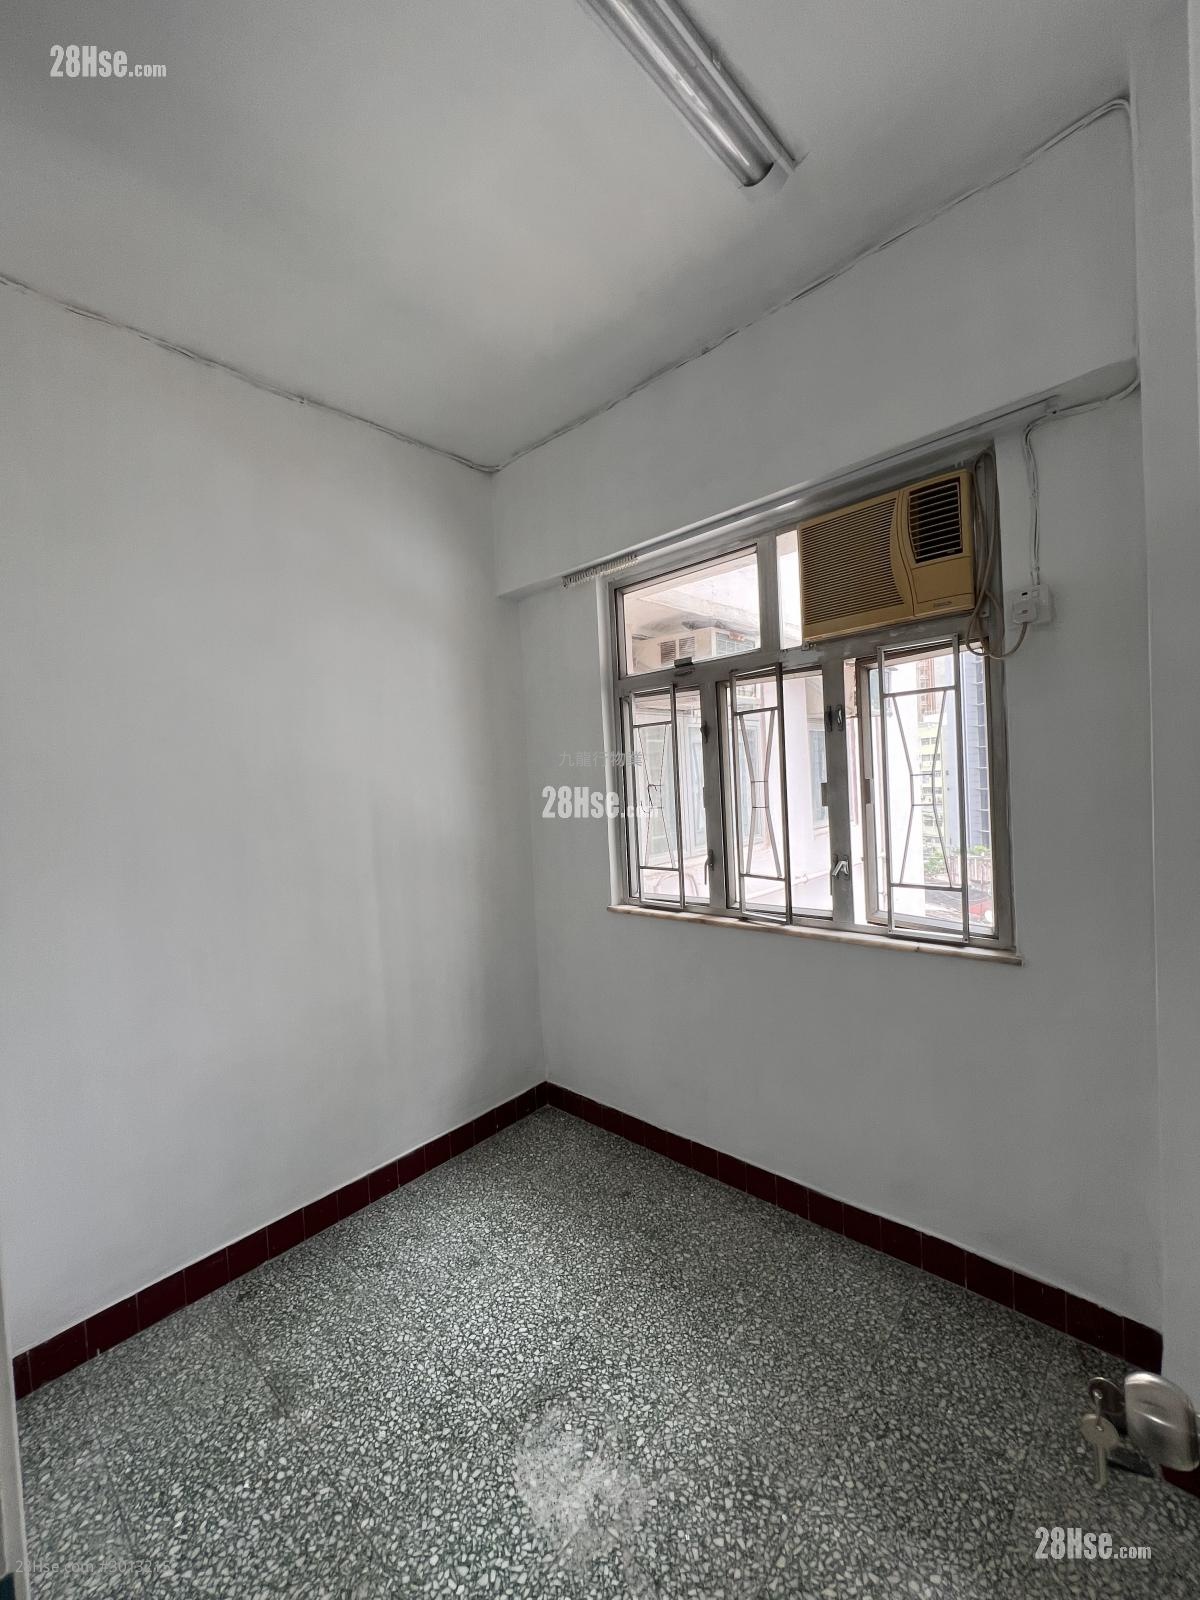 Hong King Building Sell 3 bedrooms , 1 bathrooms 487 ft²